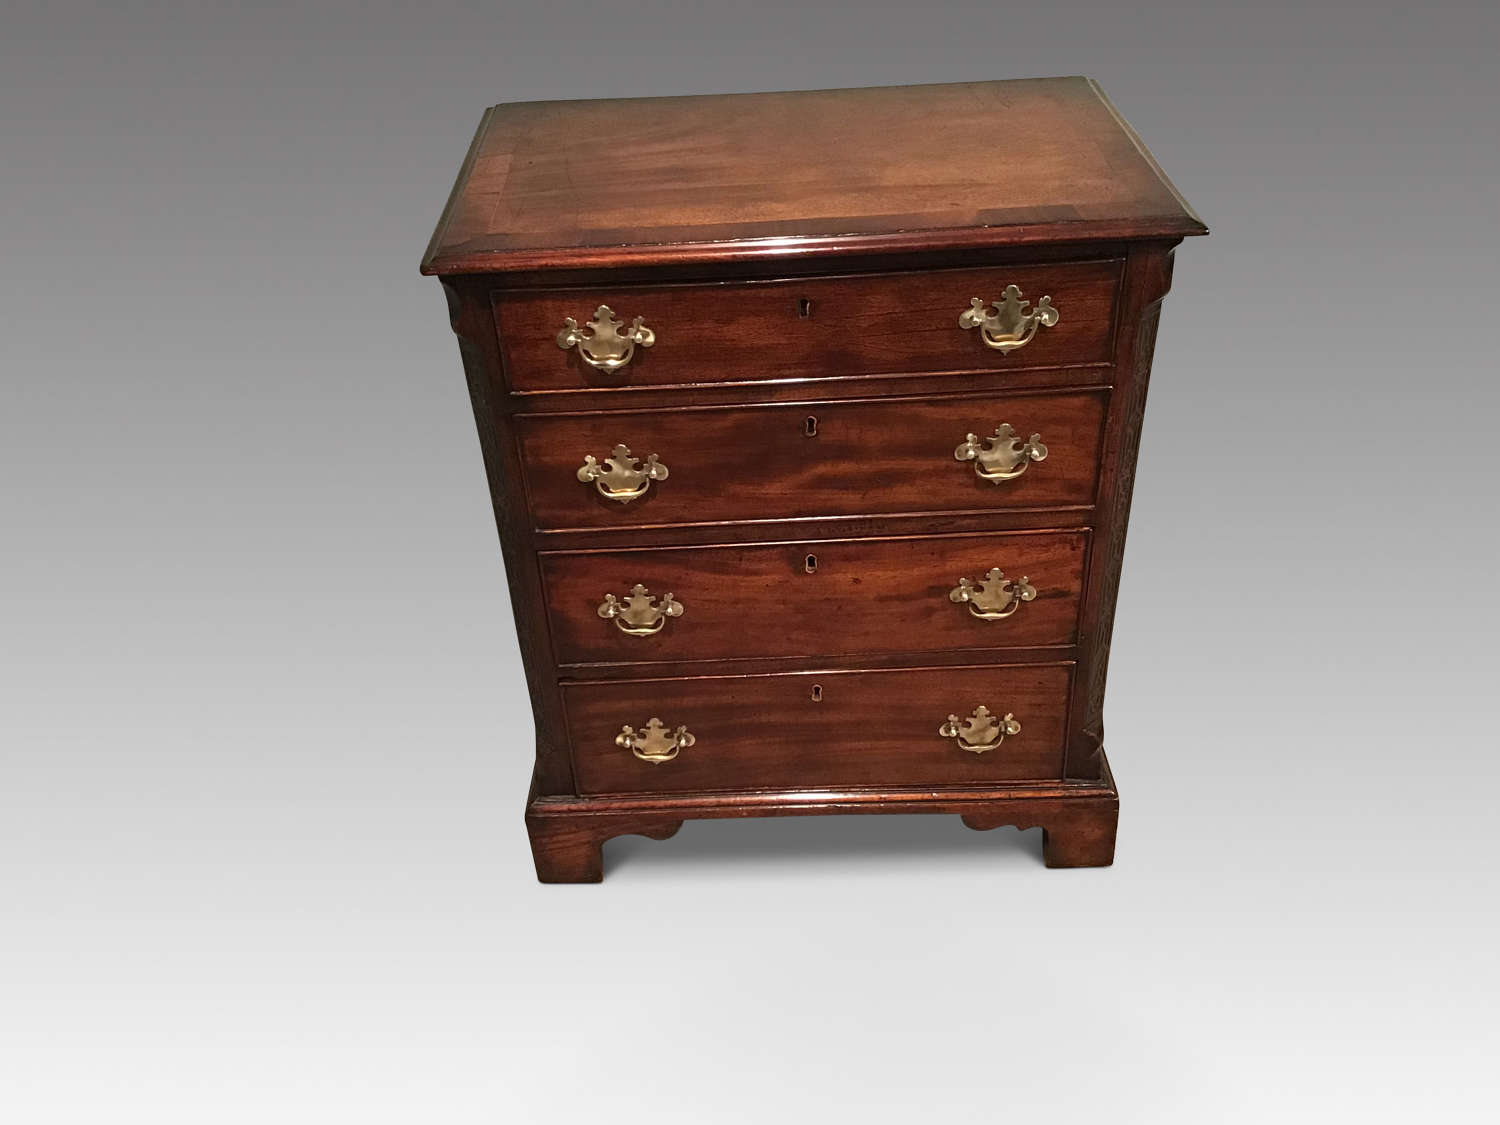 Small antique mahogany chest of drawers